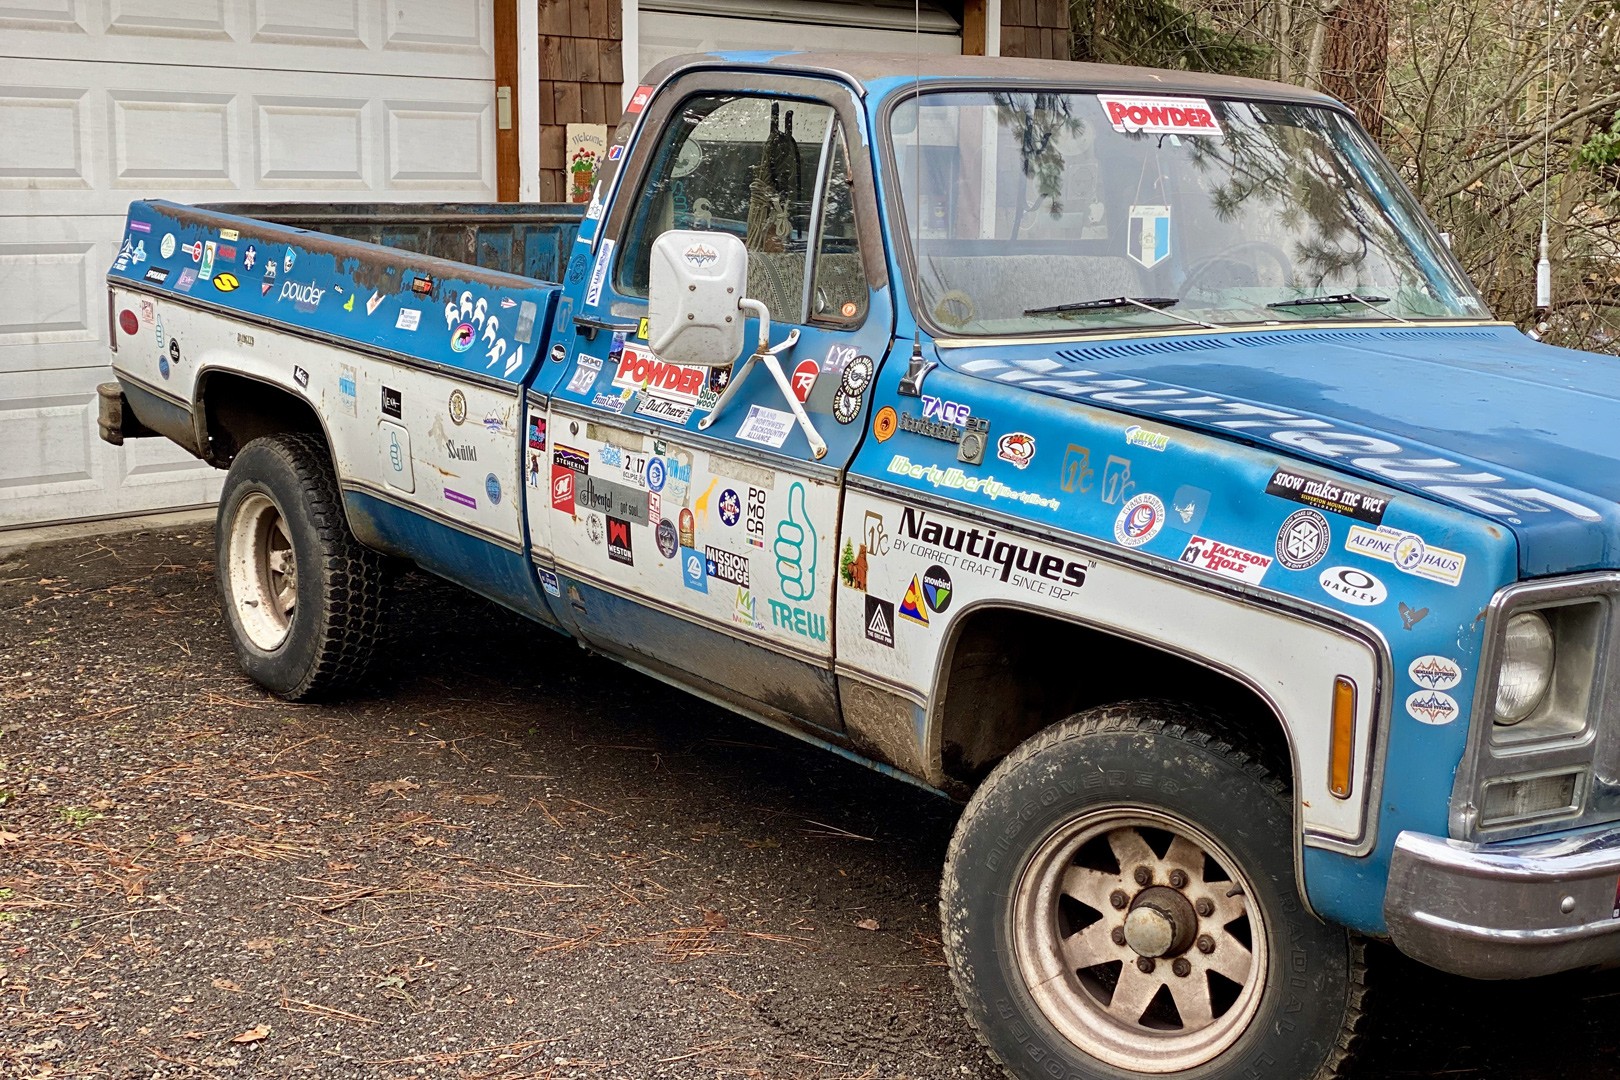 A man and his truck: It's a tale as old as skiing and stickers